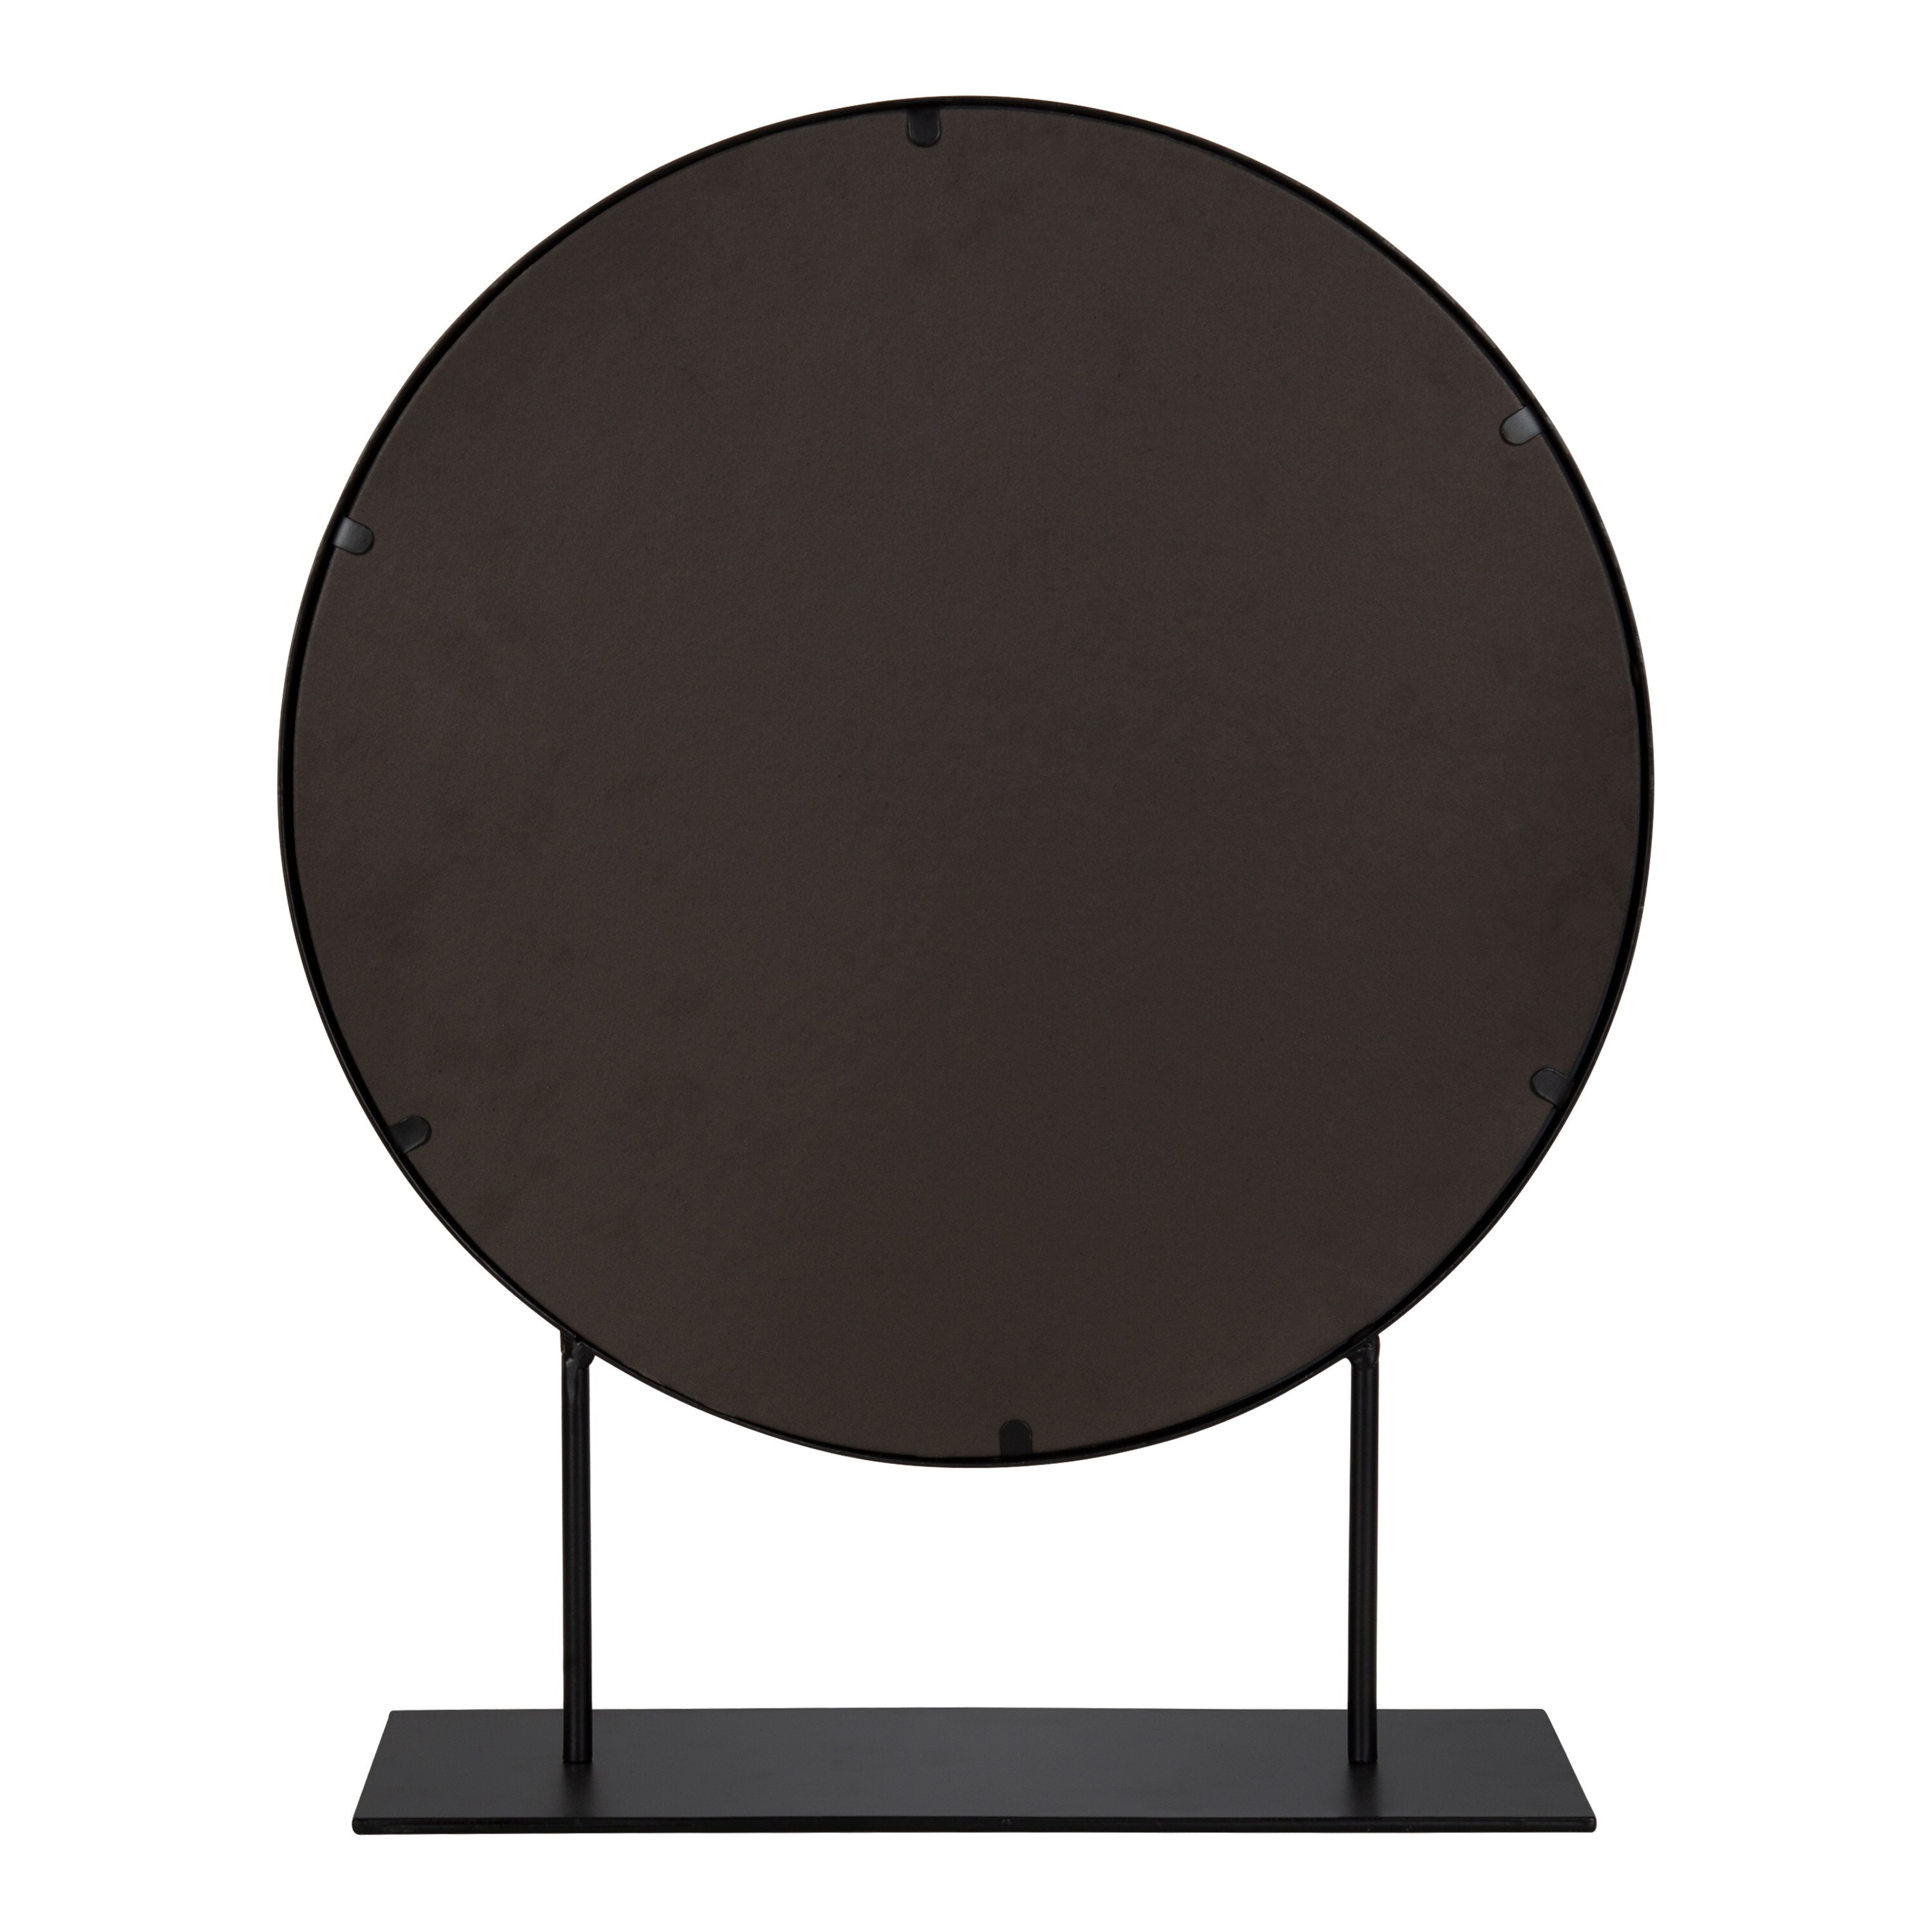 Kate and Laurel Rouen 18-in W x 22-in H Round Black Framed Wall Mirror